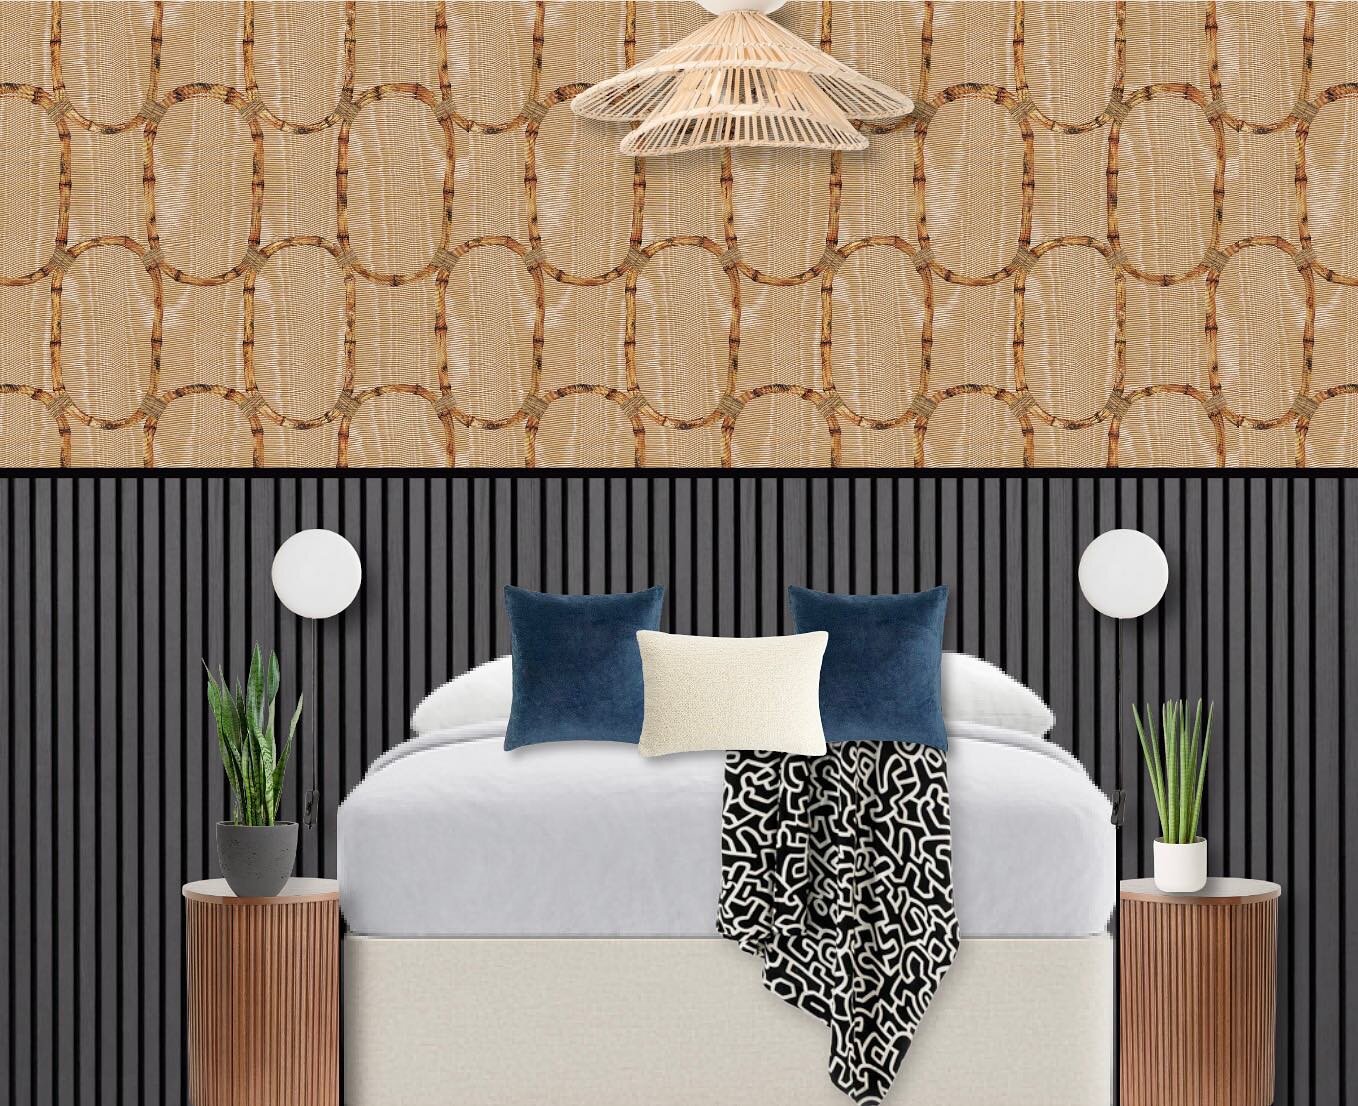 I&rsquo;m designing another bedroom around another fabulous @poodleandblonde pattern..but this time it&rsquo;s wallpaper! Paired with some charcoal @naturewalluk panelling of course! This loft bedroom which will be a guest room has been so fun to wor